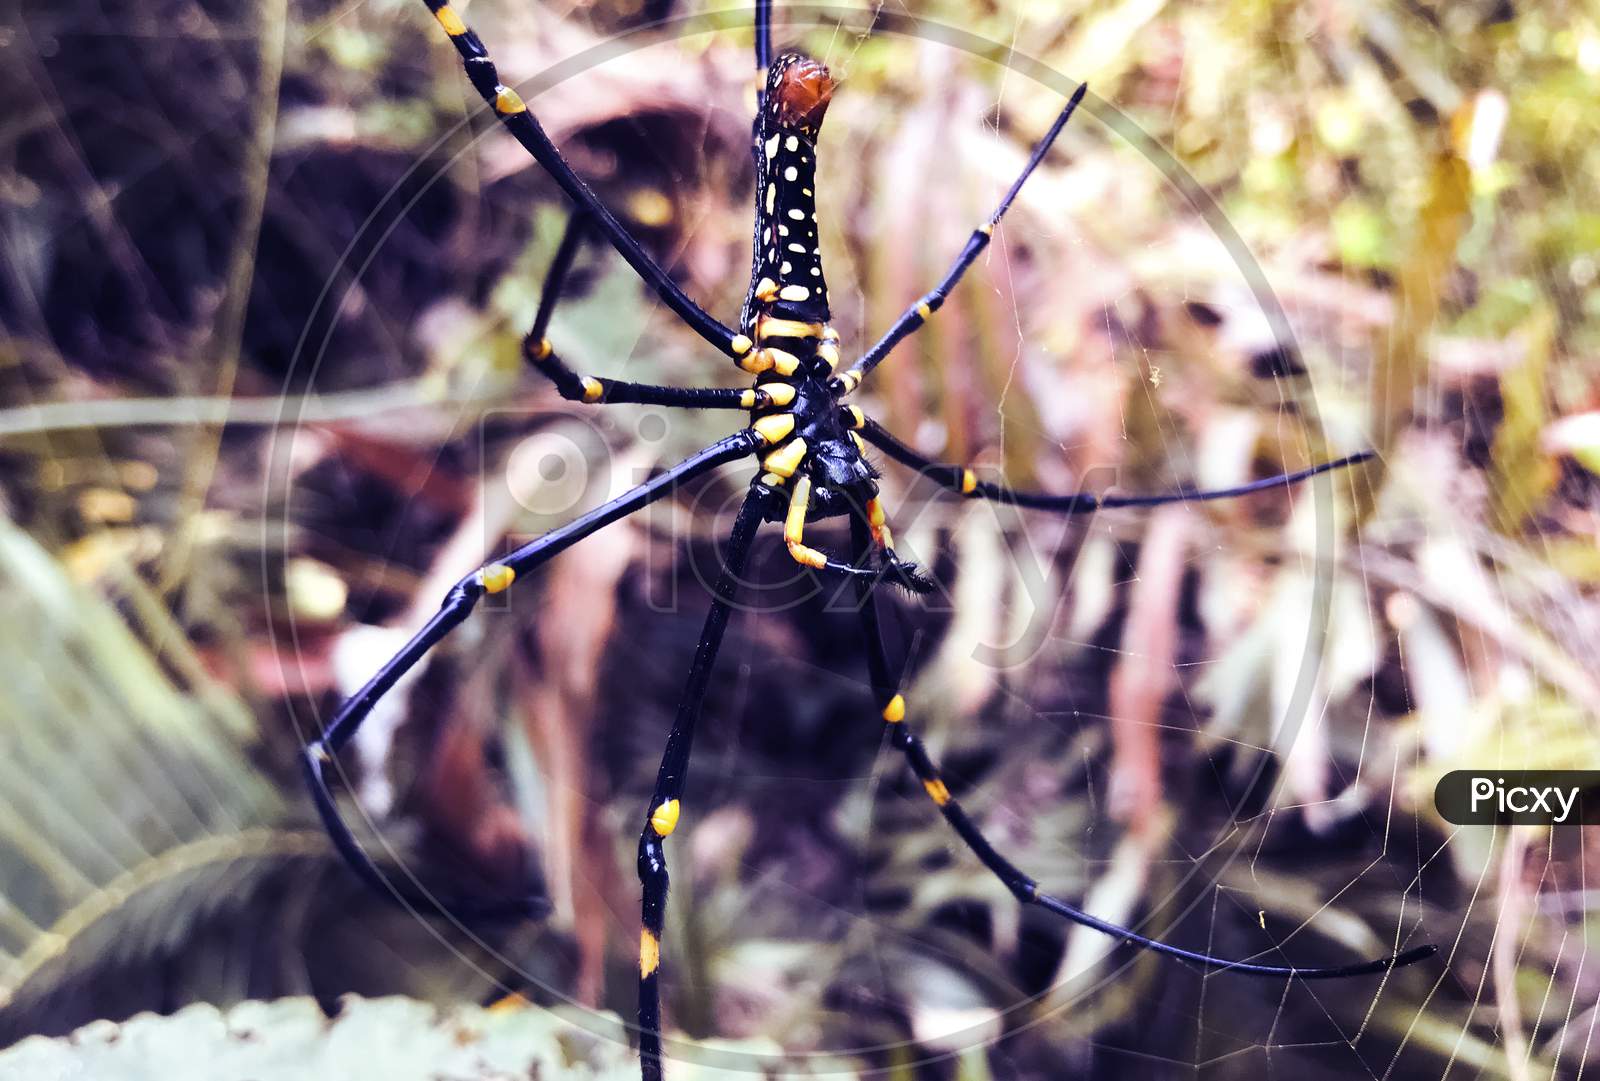 Large Tropical Spider -Nephila. Spider And Spider Web . A Black And Yellow Colour Spider Close Up Shot, Black Spider, Macro Picture,Natural Background, Colorful Big Spiders In Nature, Copy Space .